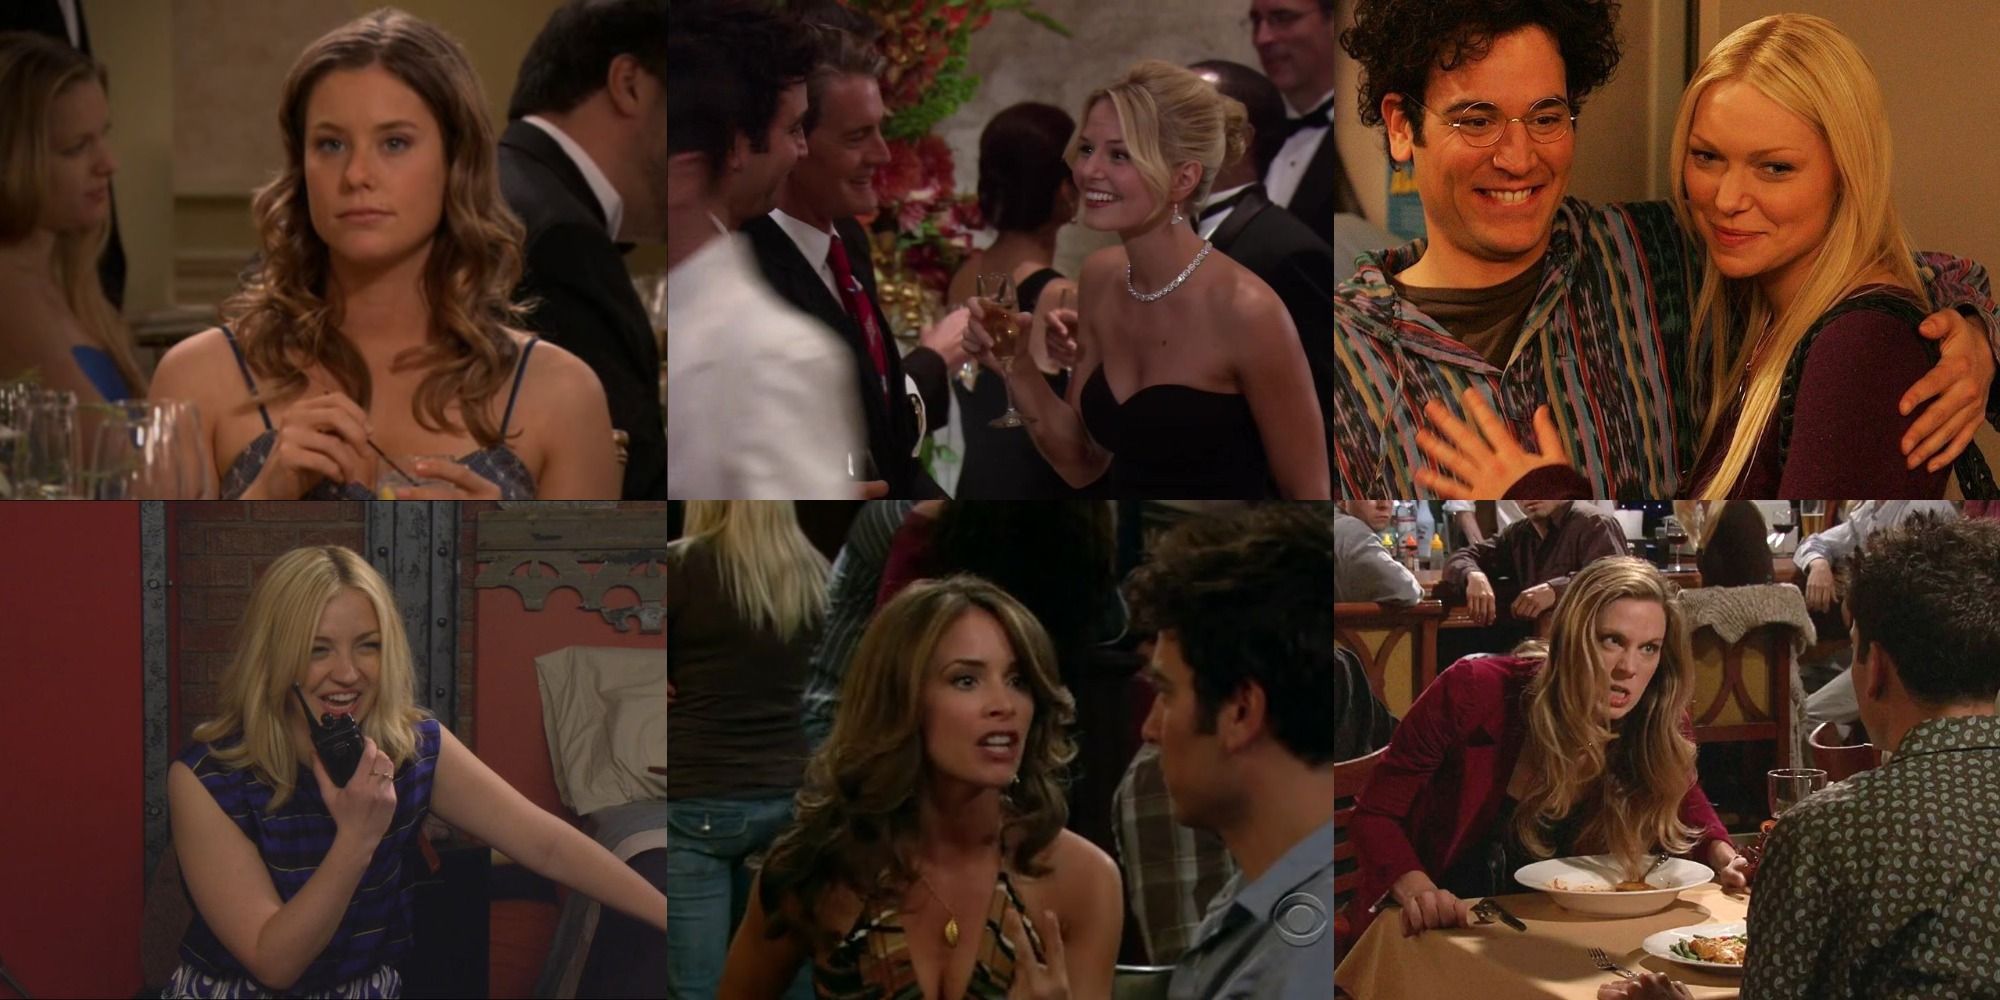 How I Met Your Mother 10 Biggest Ways Ted Changed From Season 1 To The Fina...